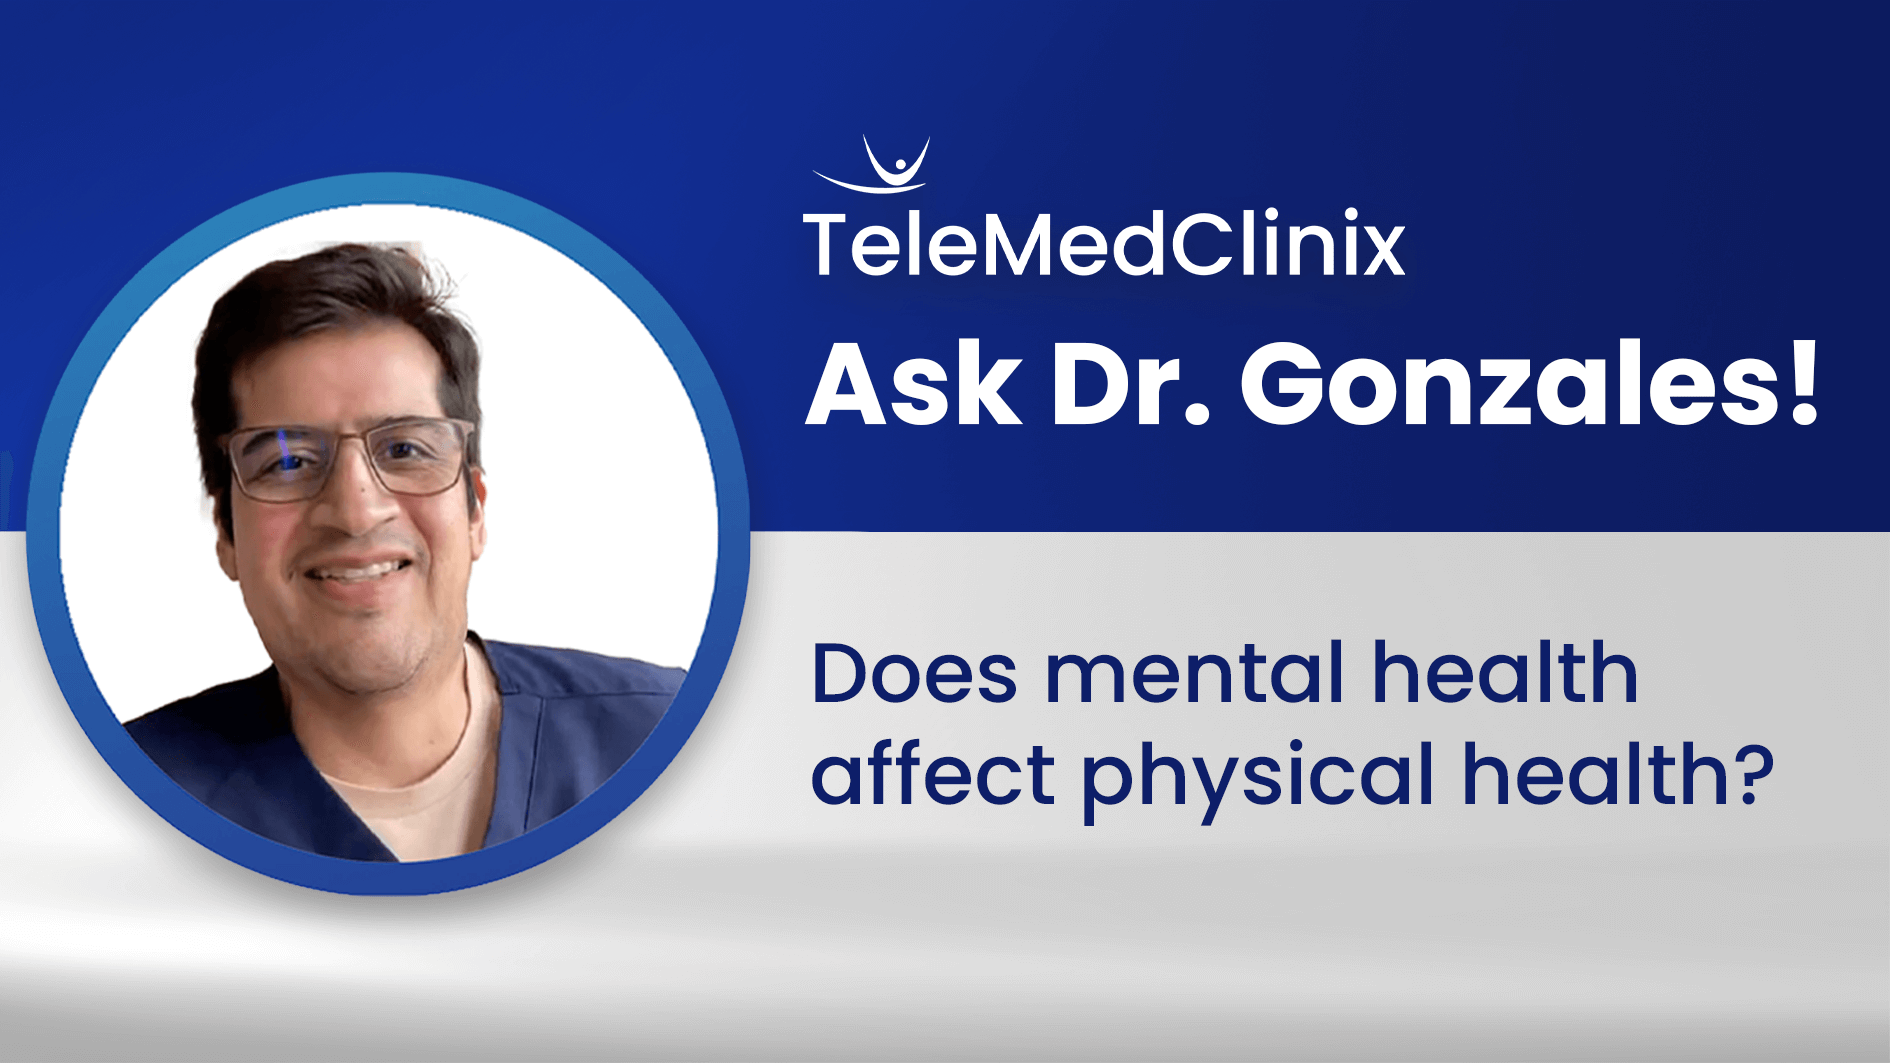 Does mental health affect physical health?